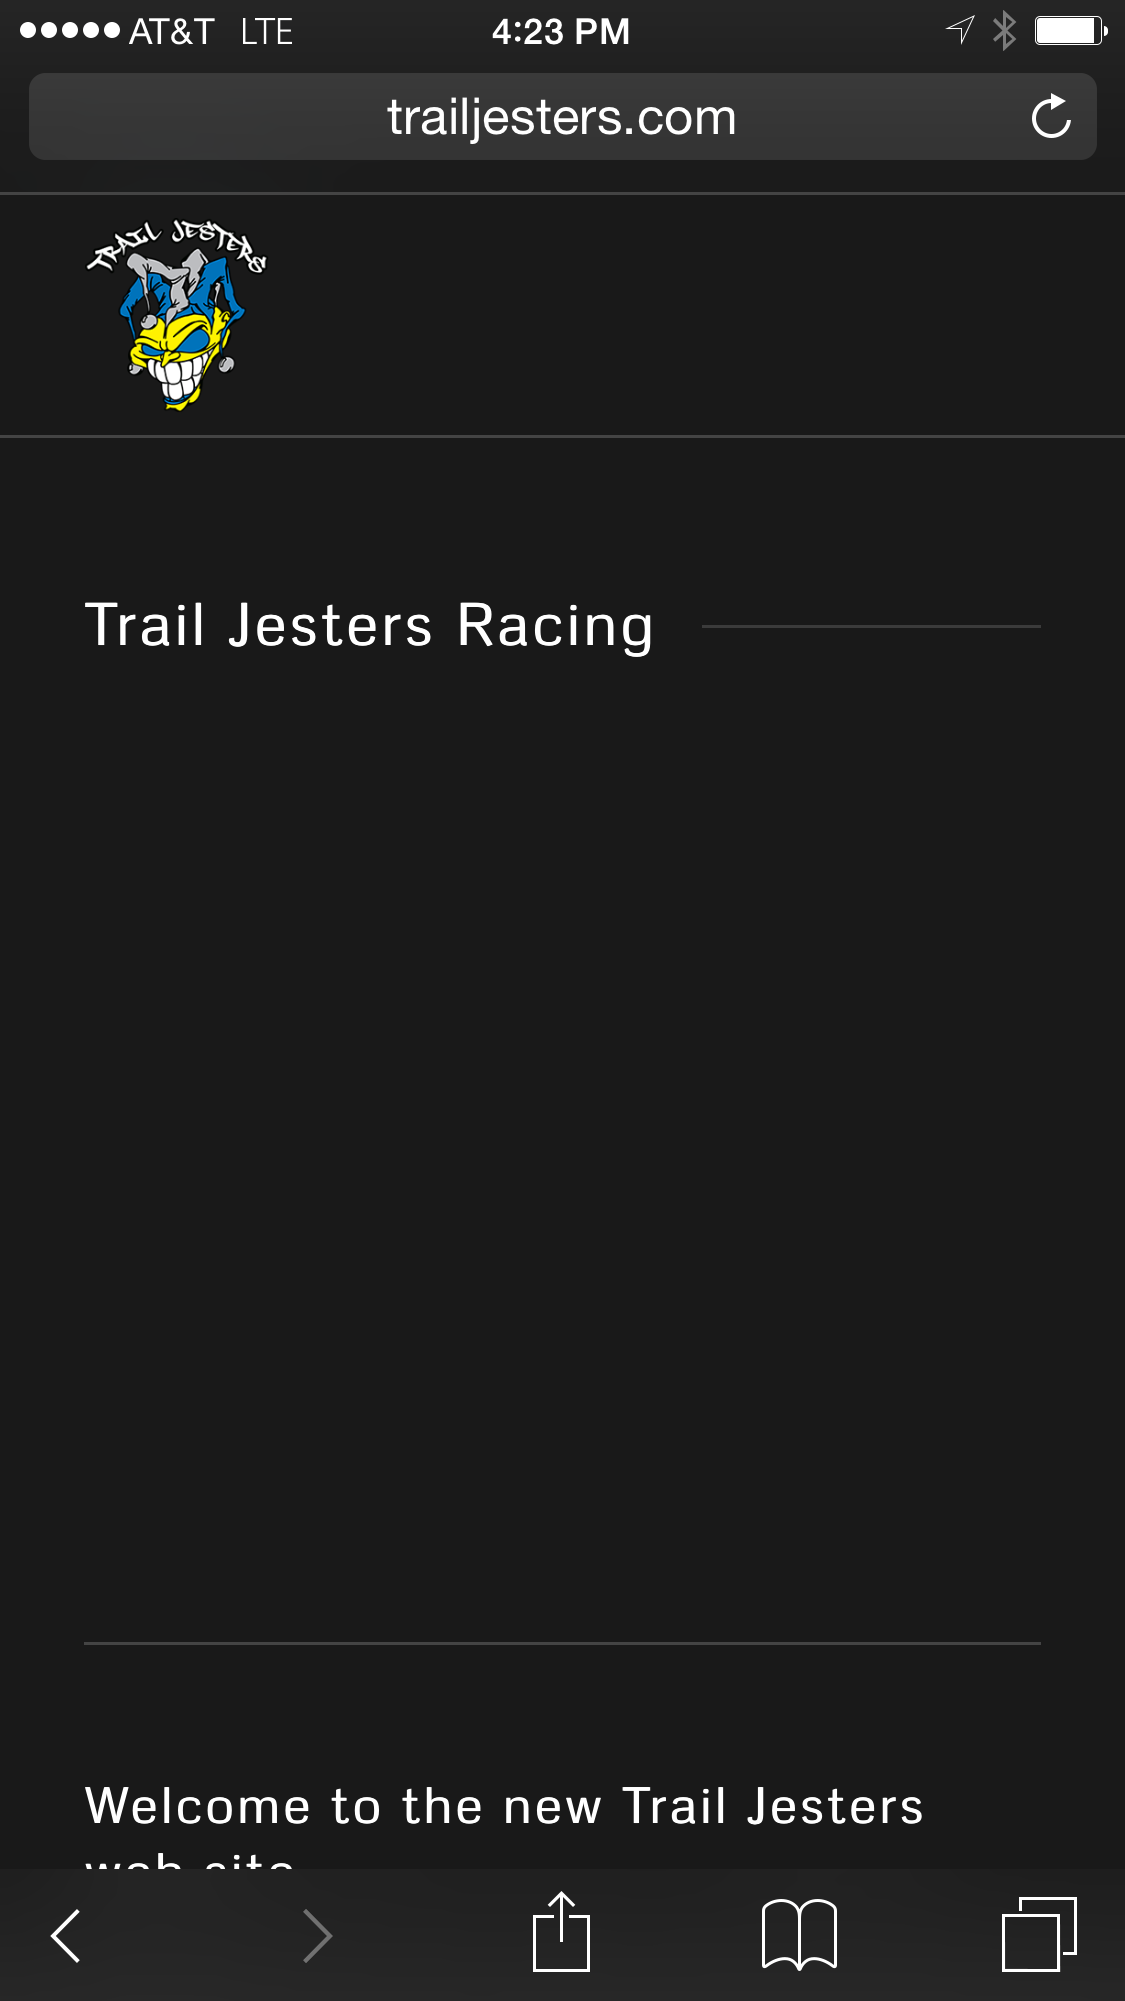 trailjesters.com home page as seen from iphone 6+ in safari